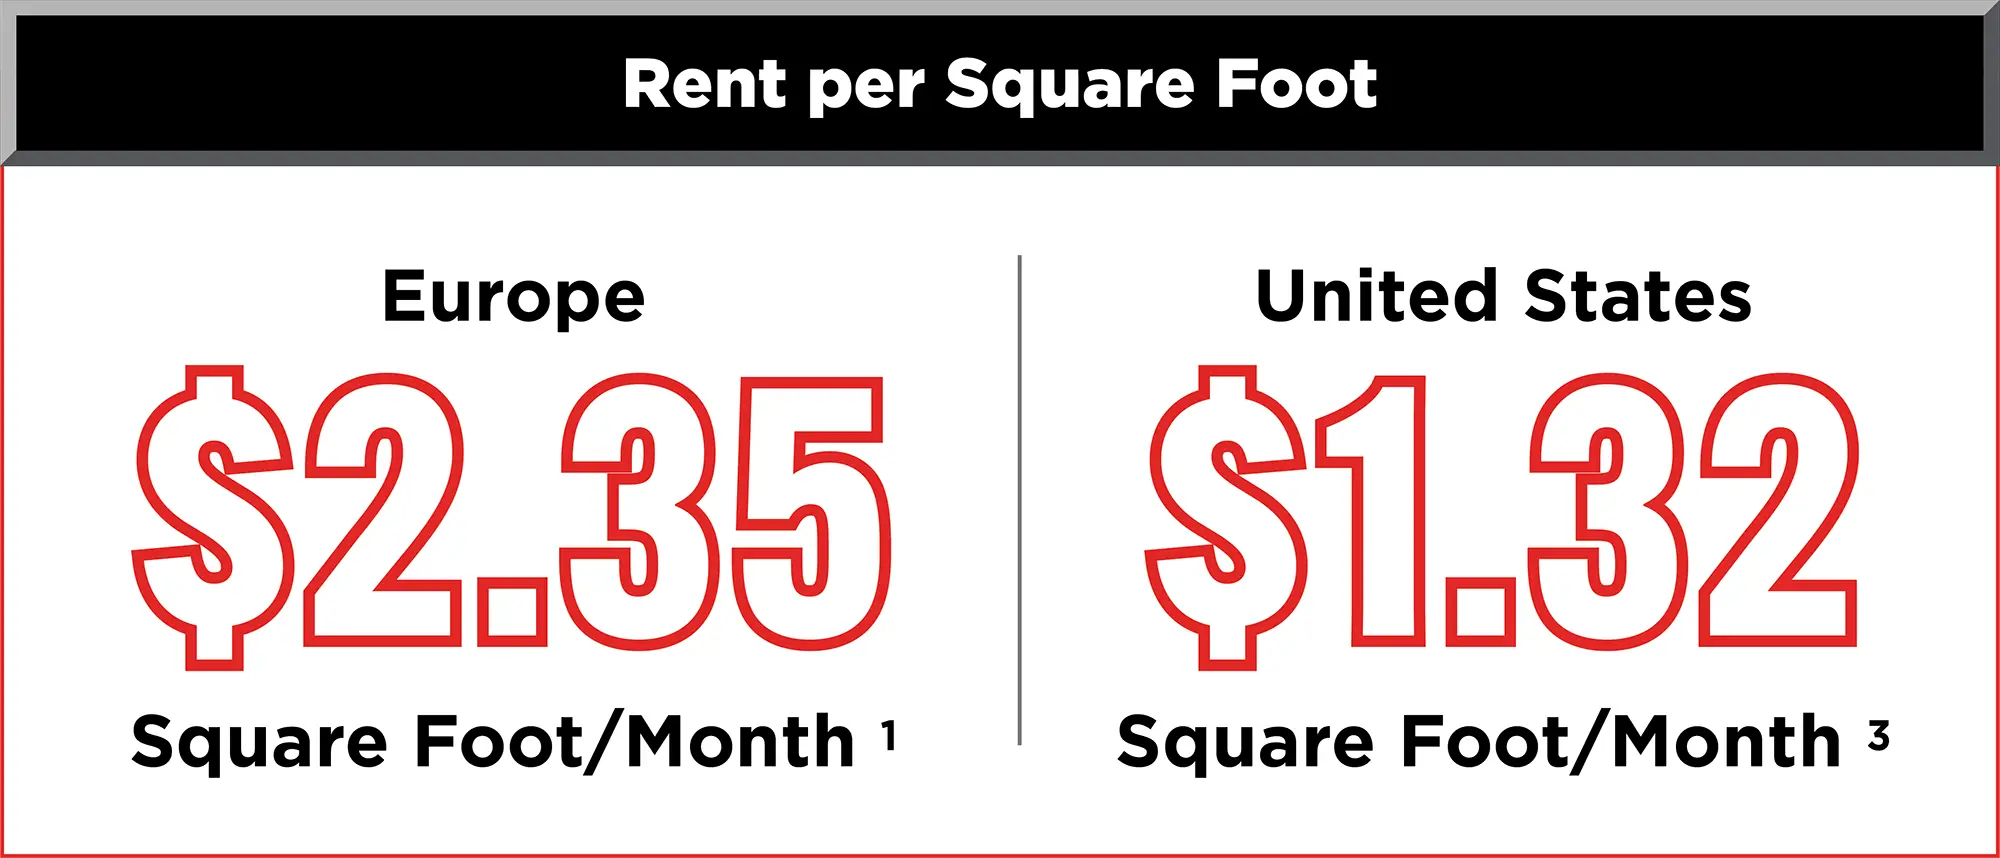 Rent per Square Foot. Europe $2.35 Square Foot/Month. United States $1.32 Square Foot/Month.